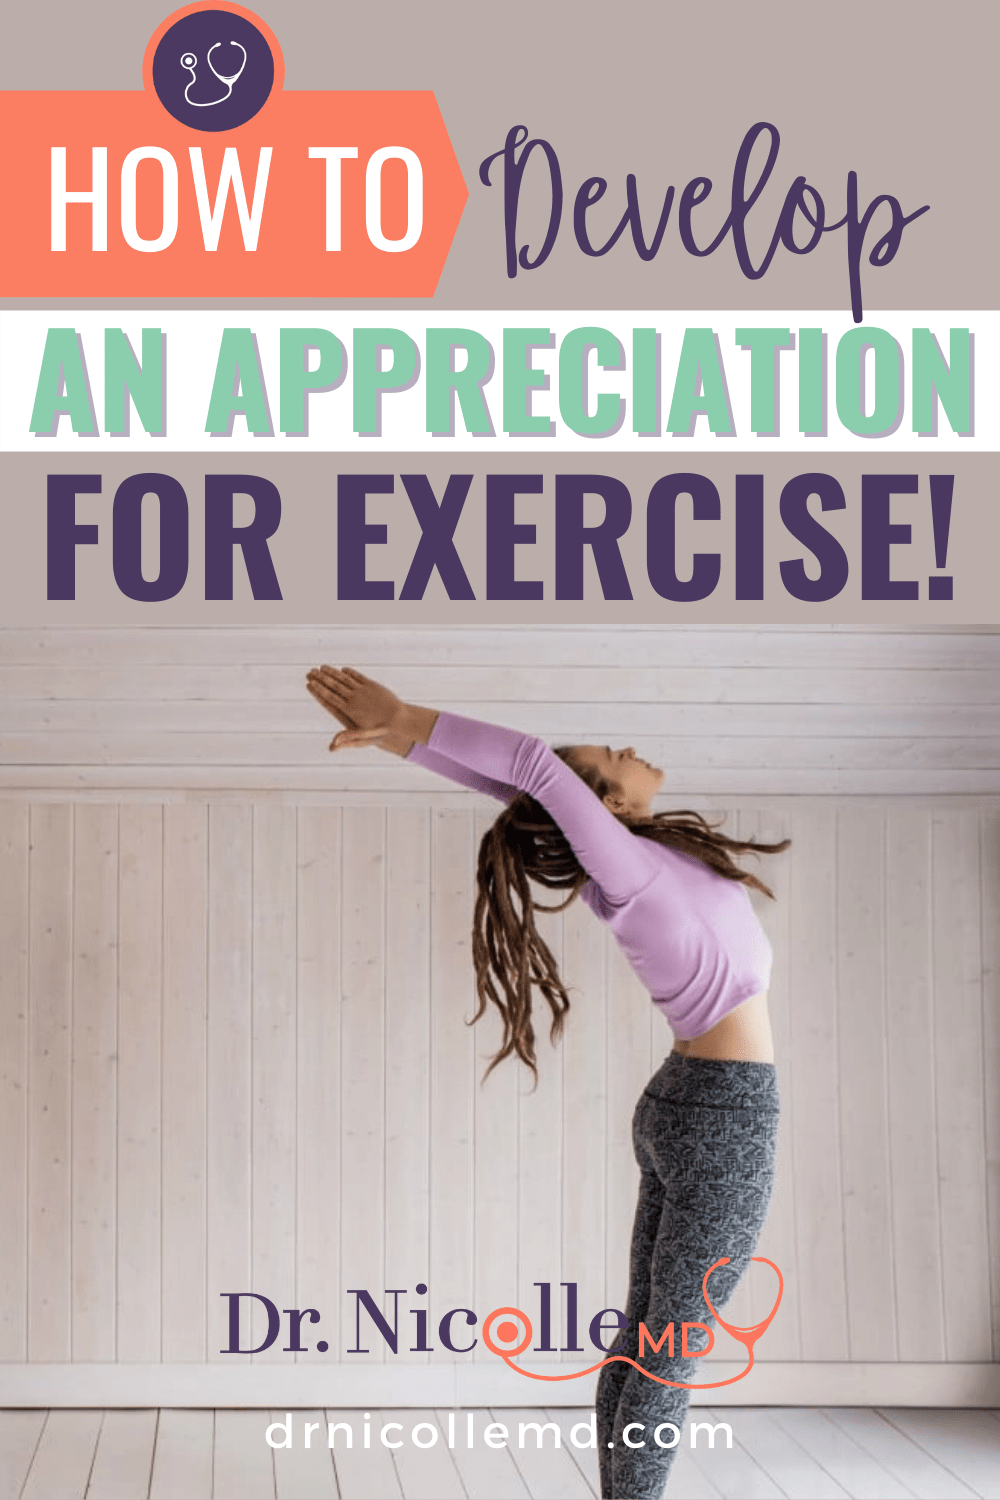 How To Develop an Appreciation for Exercise!